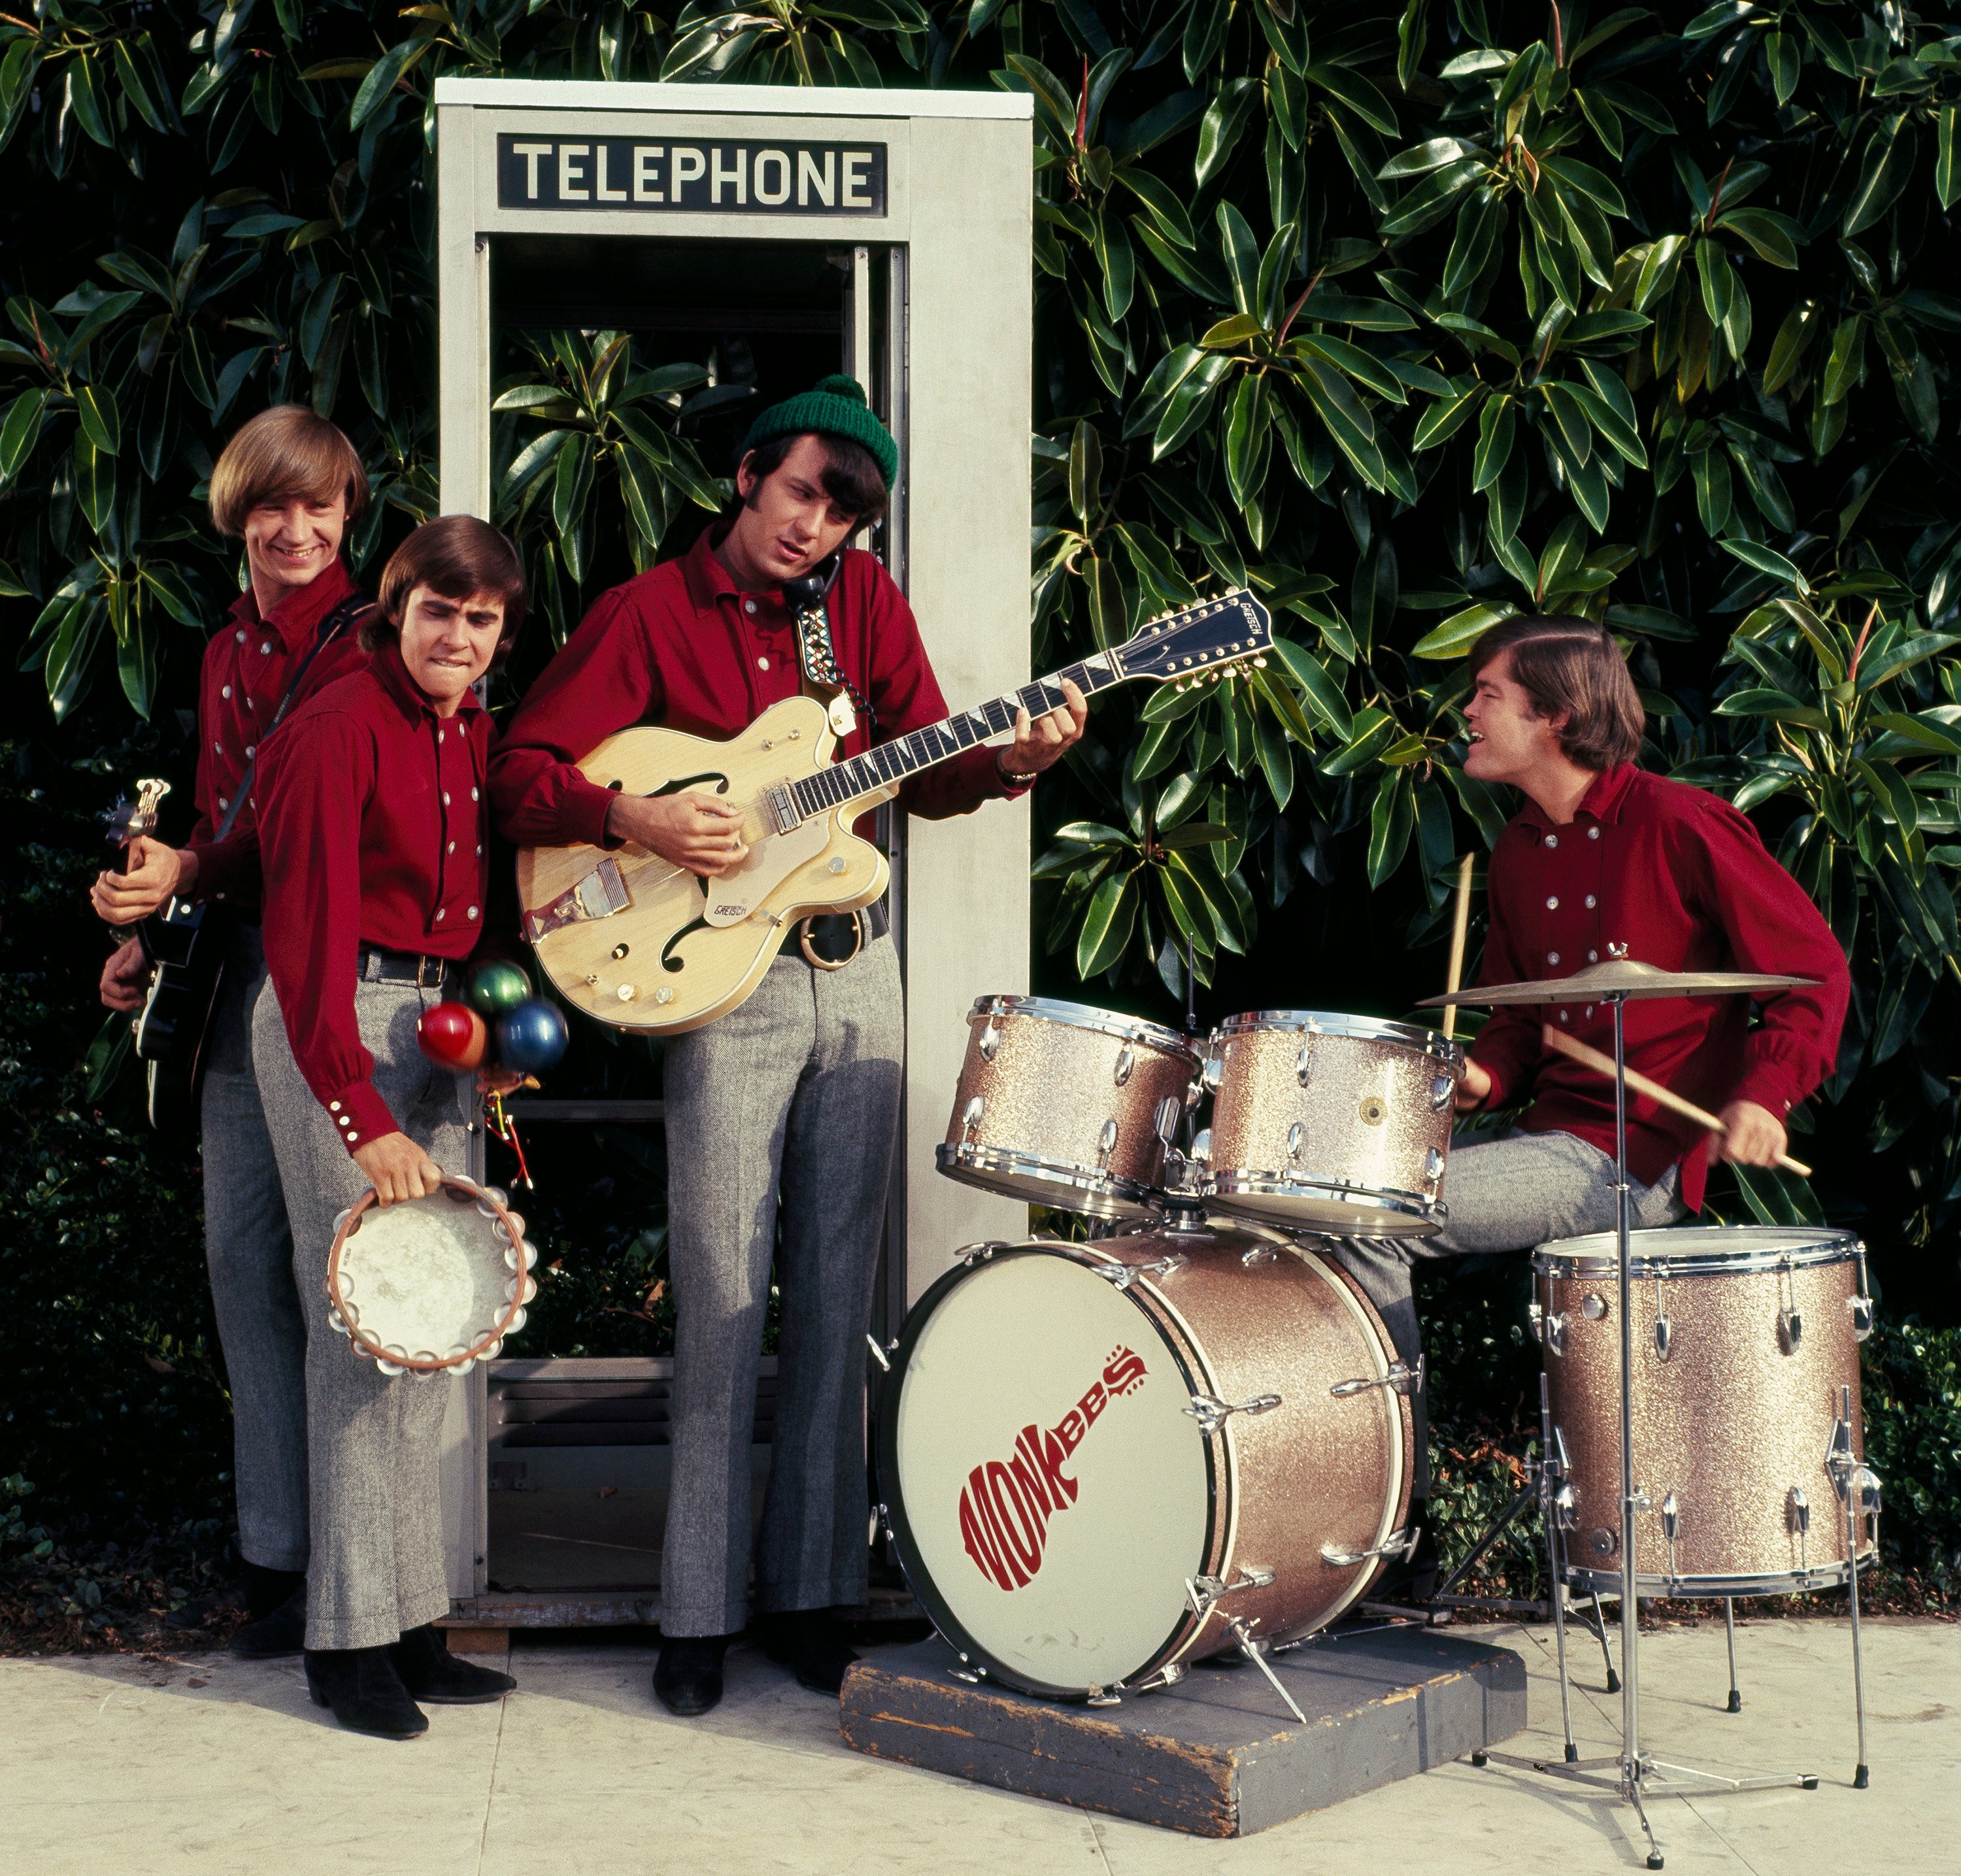 The Monkees’ Peter Tork, Davy Jones, Mike Nesmith, and Micky Dolenz playing instruments